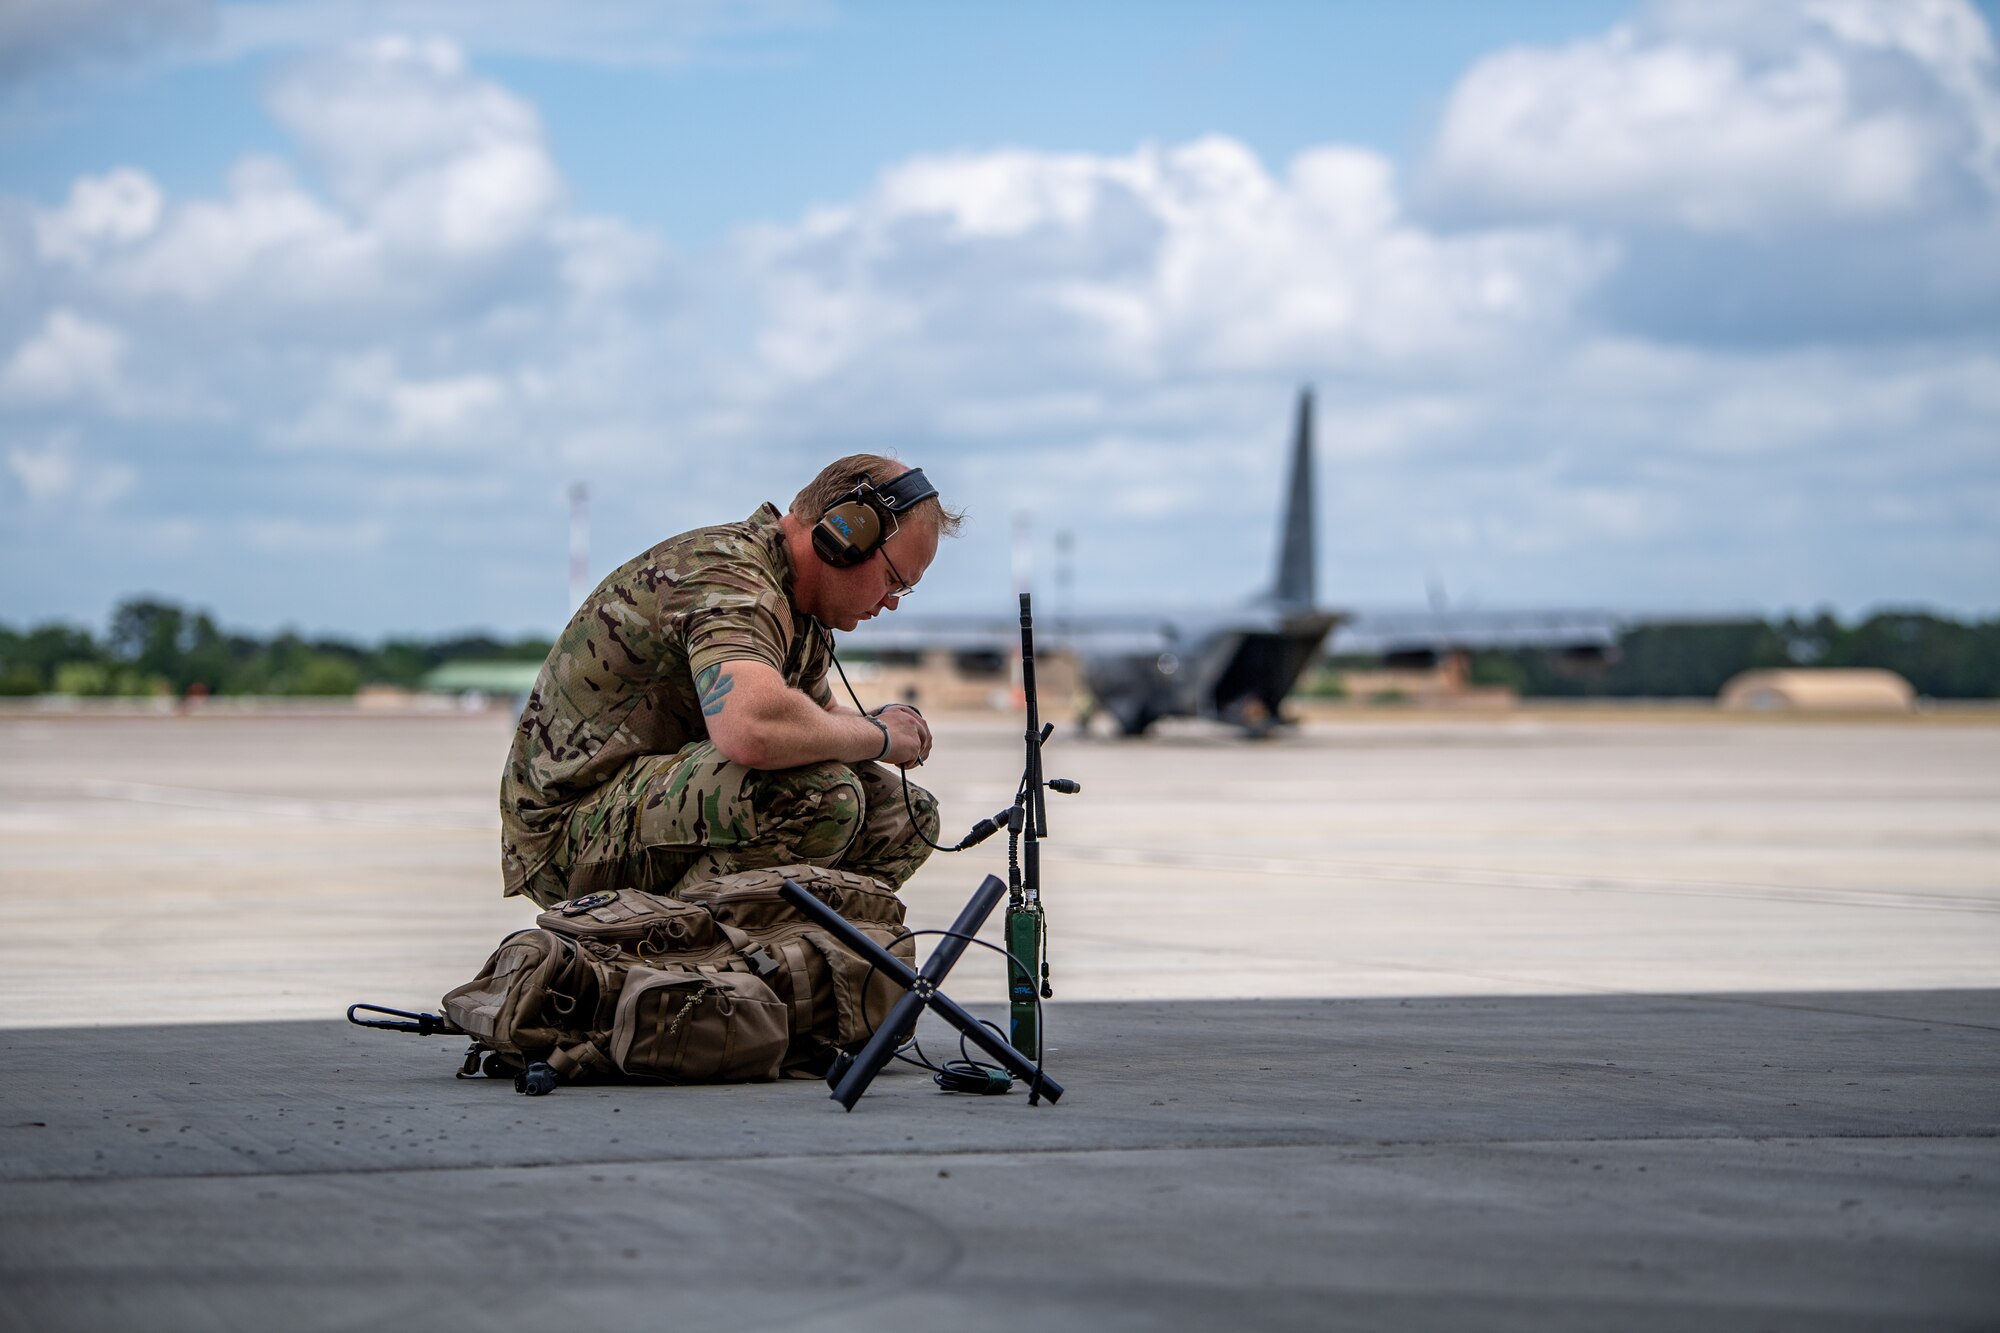 A U.S. Air Force Airman assigned to the 38th Rescue Squadron sets up a satellite communication radio antenna during Exercise Ready Tiger 24-1 at Savannah Air National Guard Base, Georgia, April 10, 2024. During Ready Tiger 24-1, the 23rd Wing will be evaluated on the integration of Air Force Force Generation principles such as Agile Combat Employment, integrated combat turns, forward aerial refueling points, multi-capable Airmen, and combat search and rescue capabilities. (U.S. Air Force photo by Senior Airman Courtney Sebastianelli)